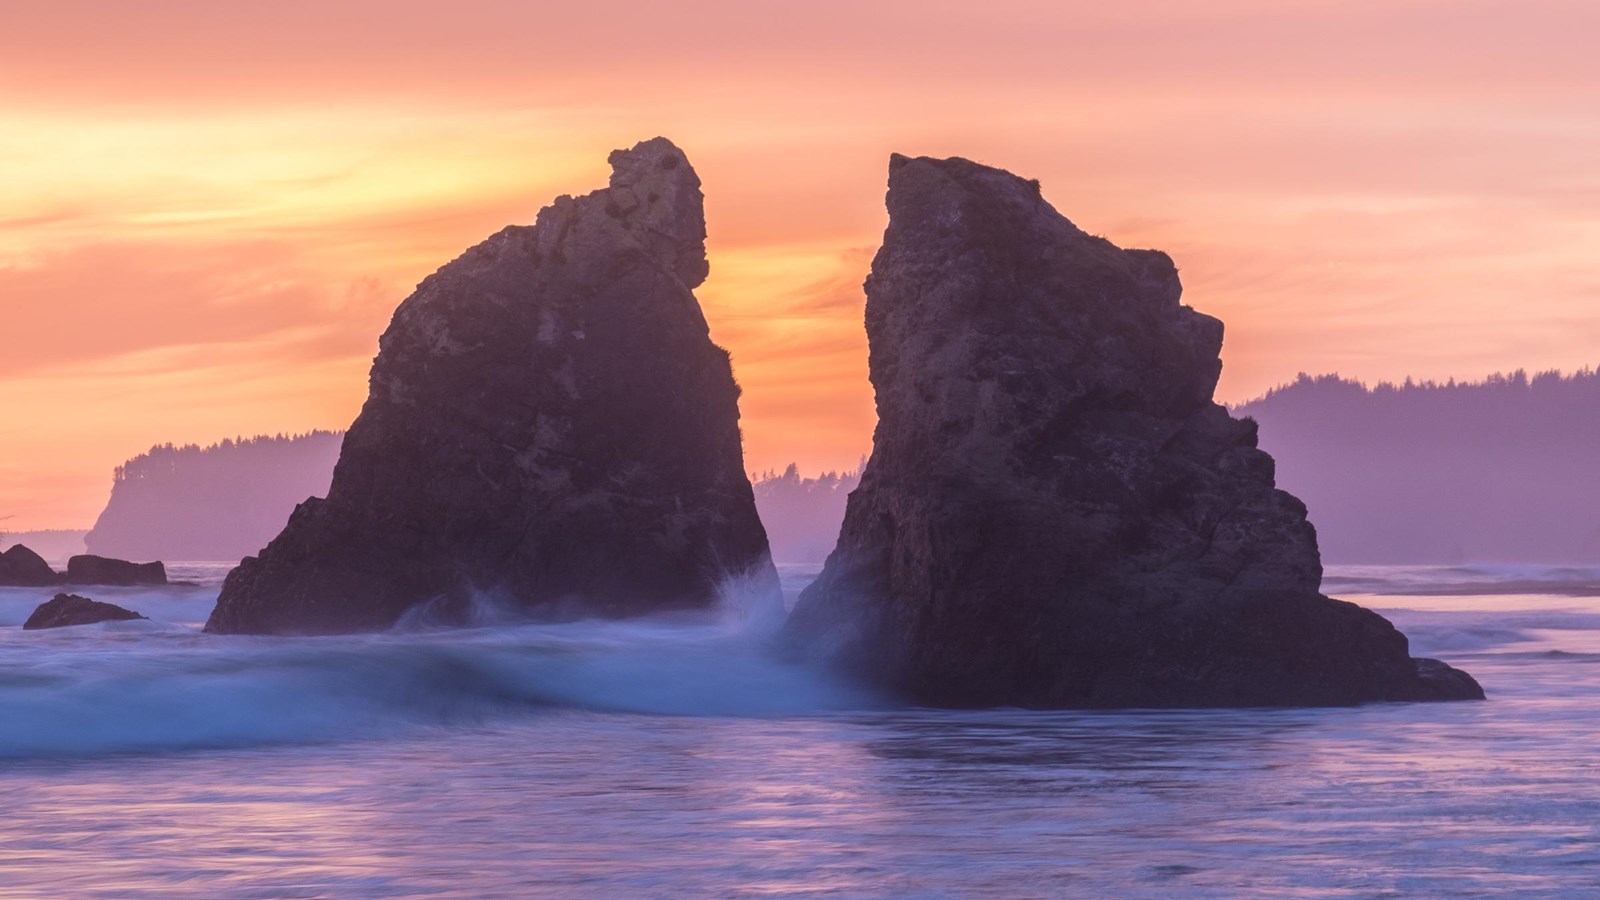 Sunset at a beach with rocky sea stacks and lavender water